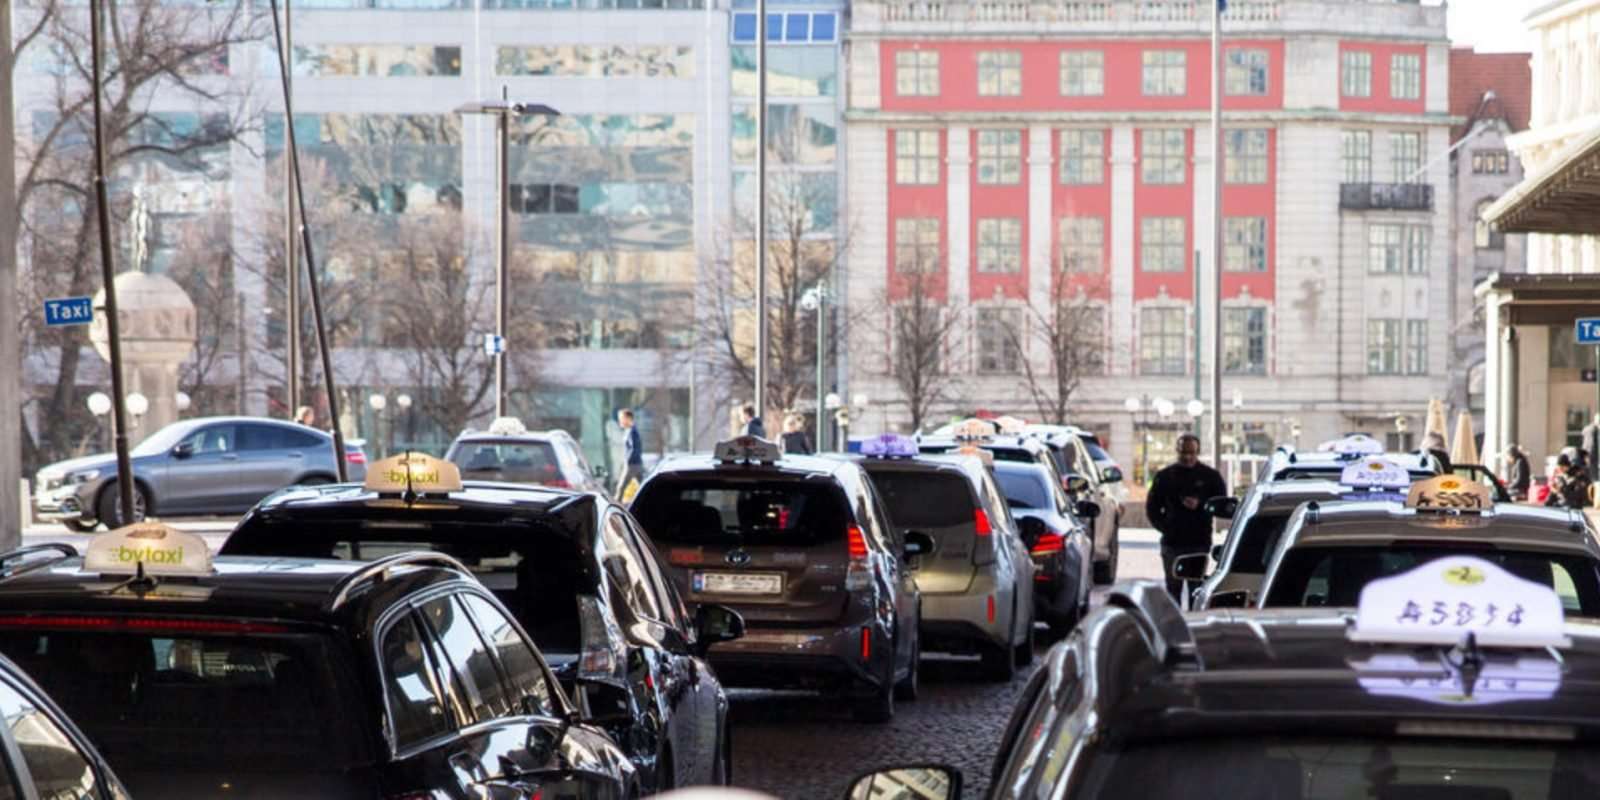 image for Oslo to become first city with wireless charging infrastructure for electric taxis